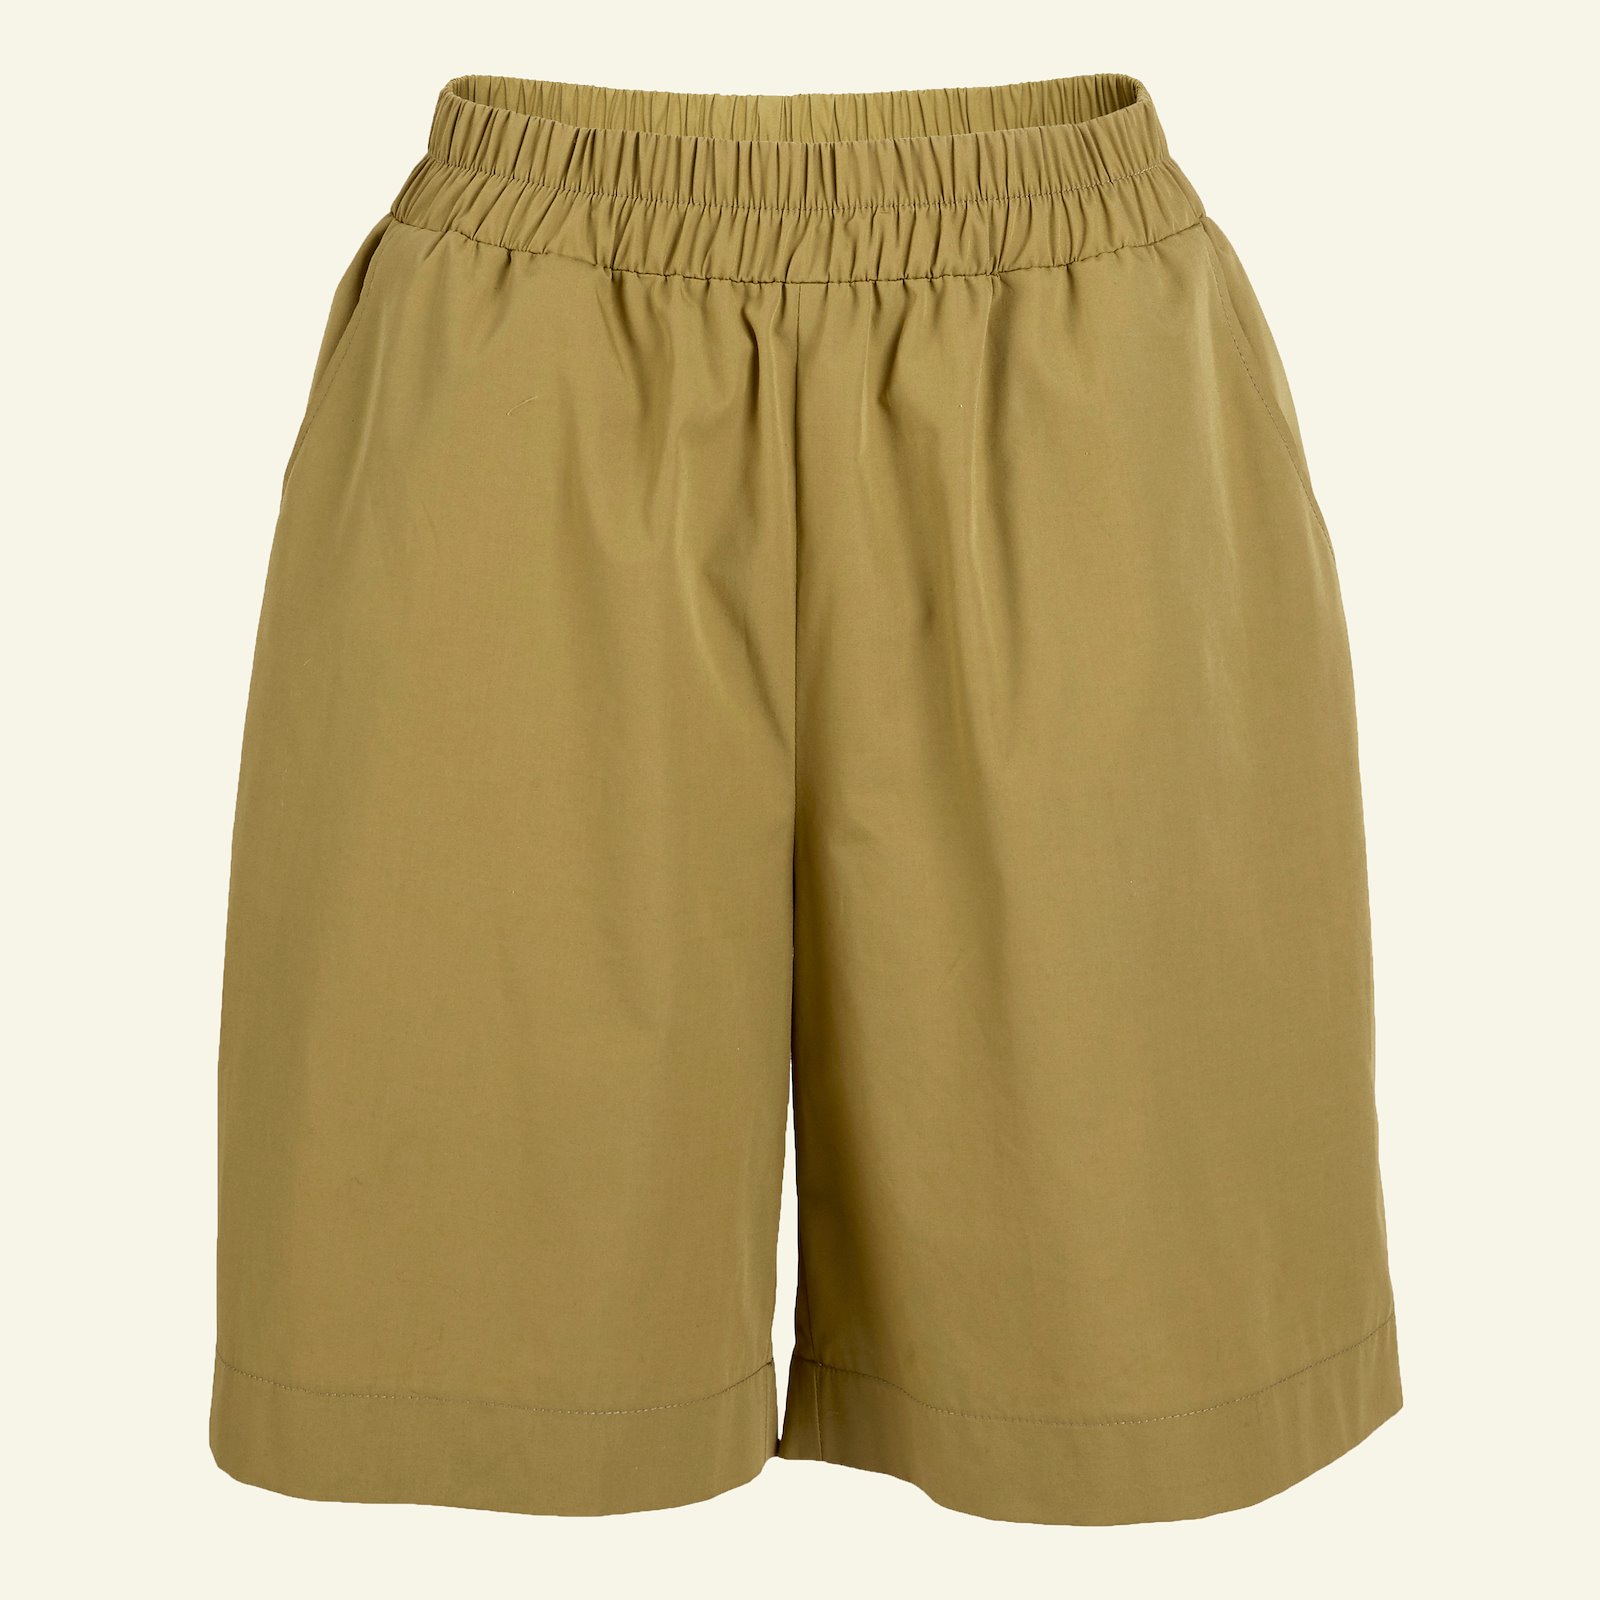 Wide trousers/shorts w. pockets, 36/8 p20051_501926_sskit